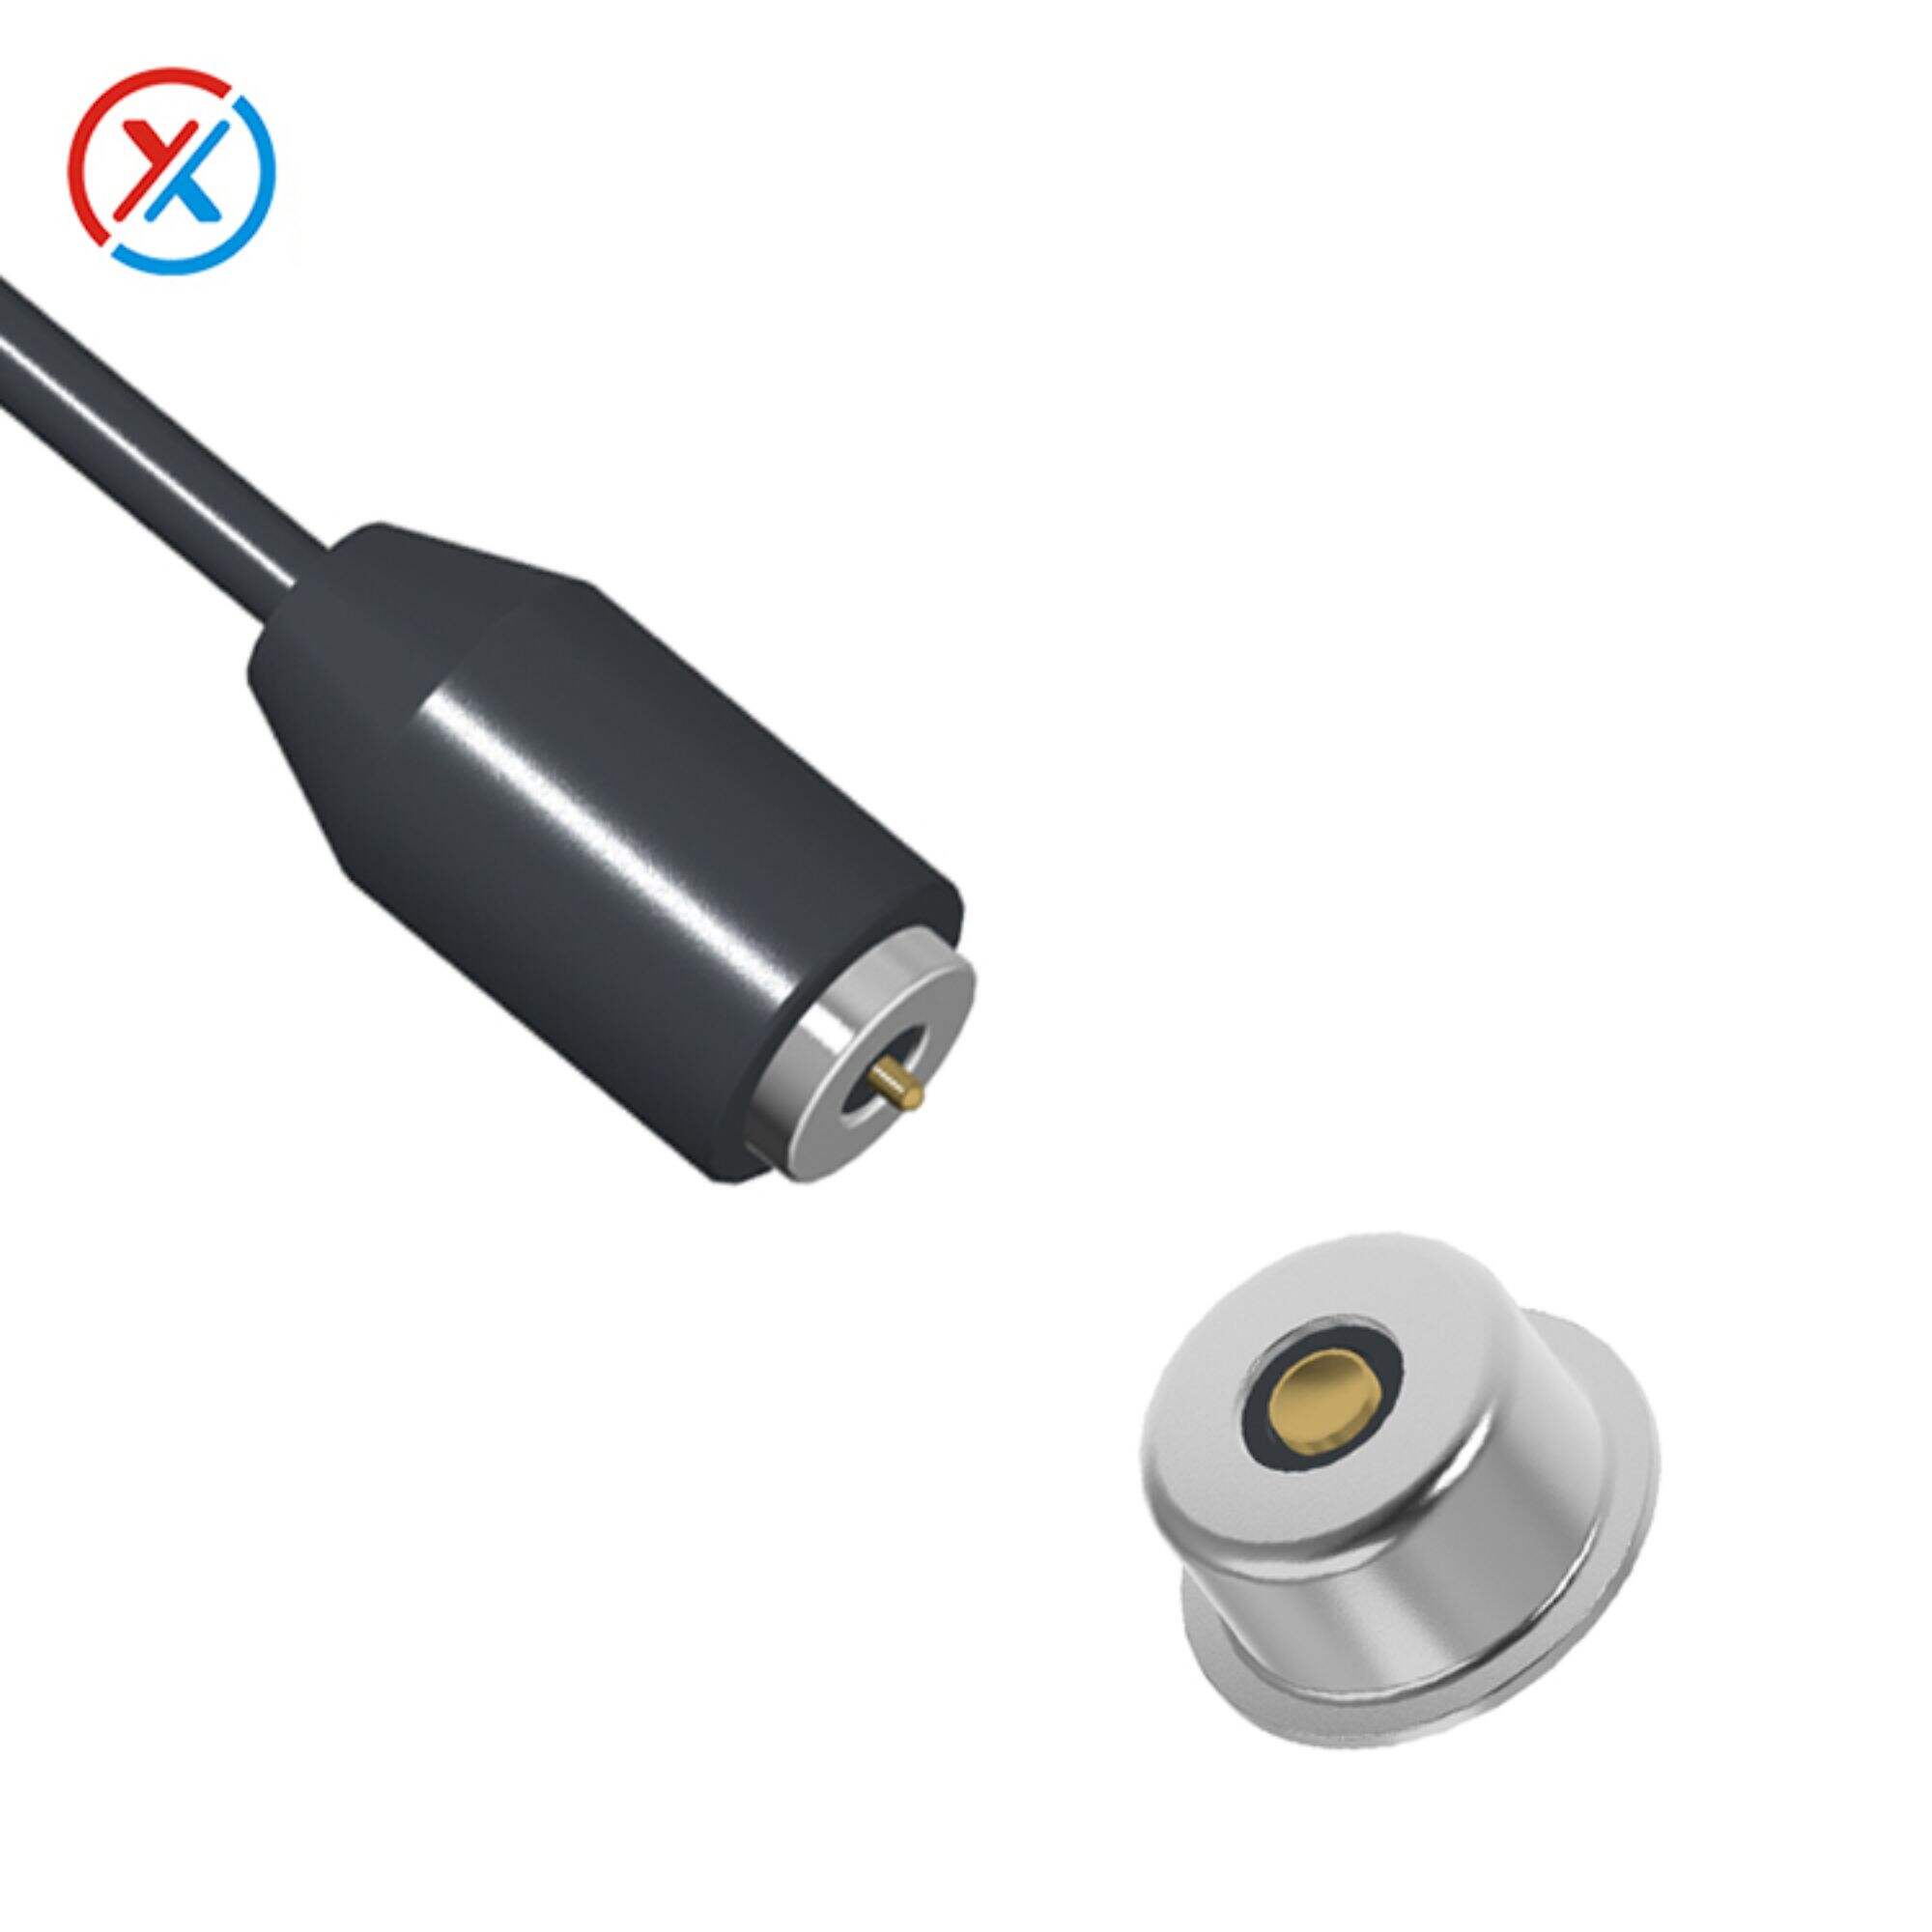 6.5mm Circular Magnetic Cable Magnetic male and female charging cable Waterproof